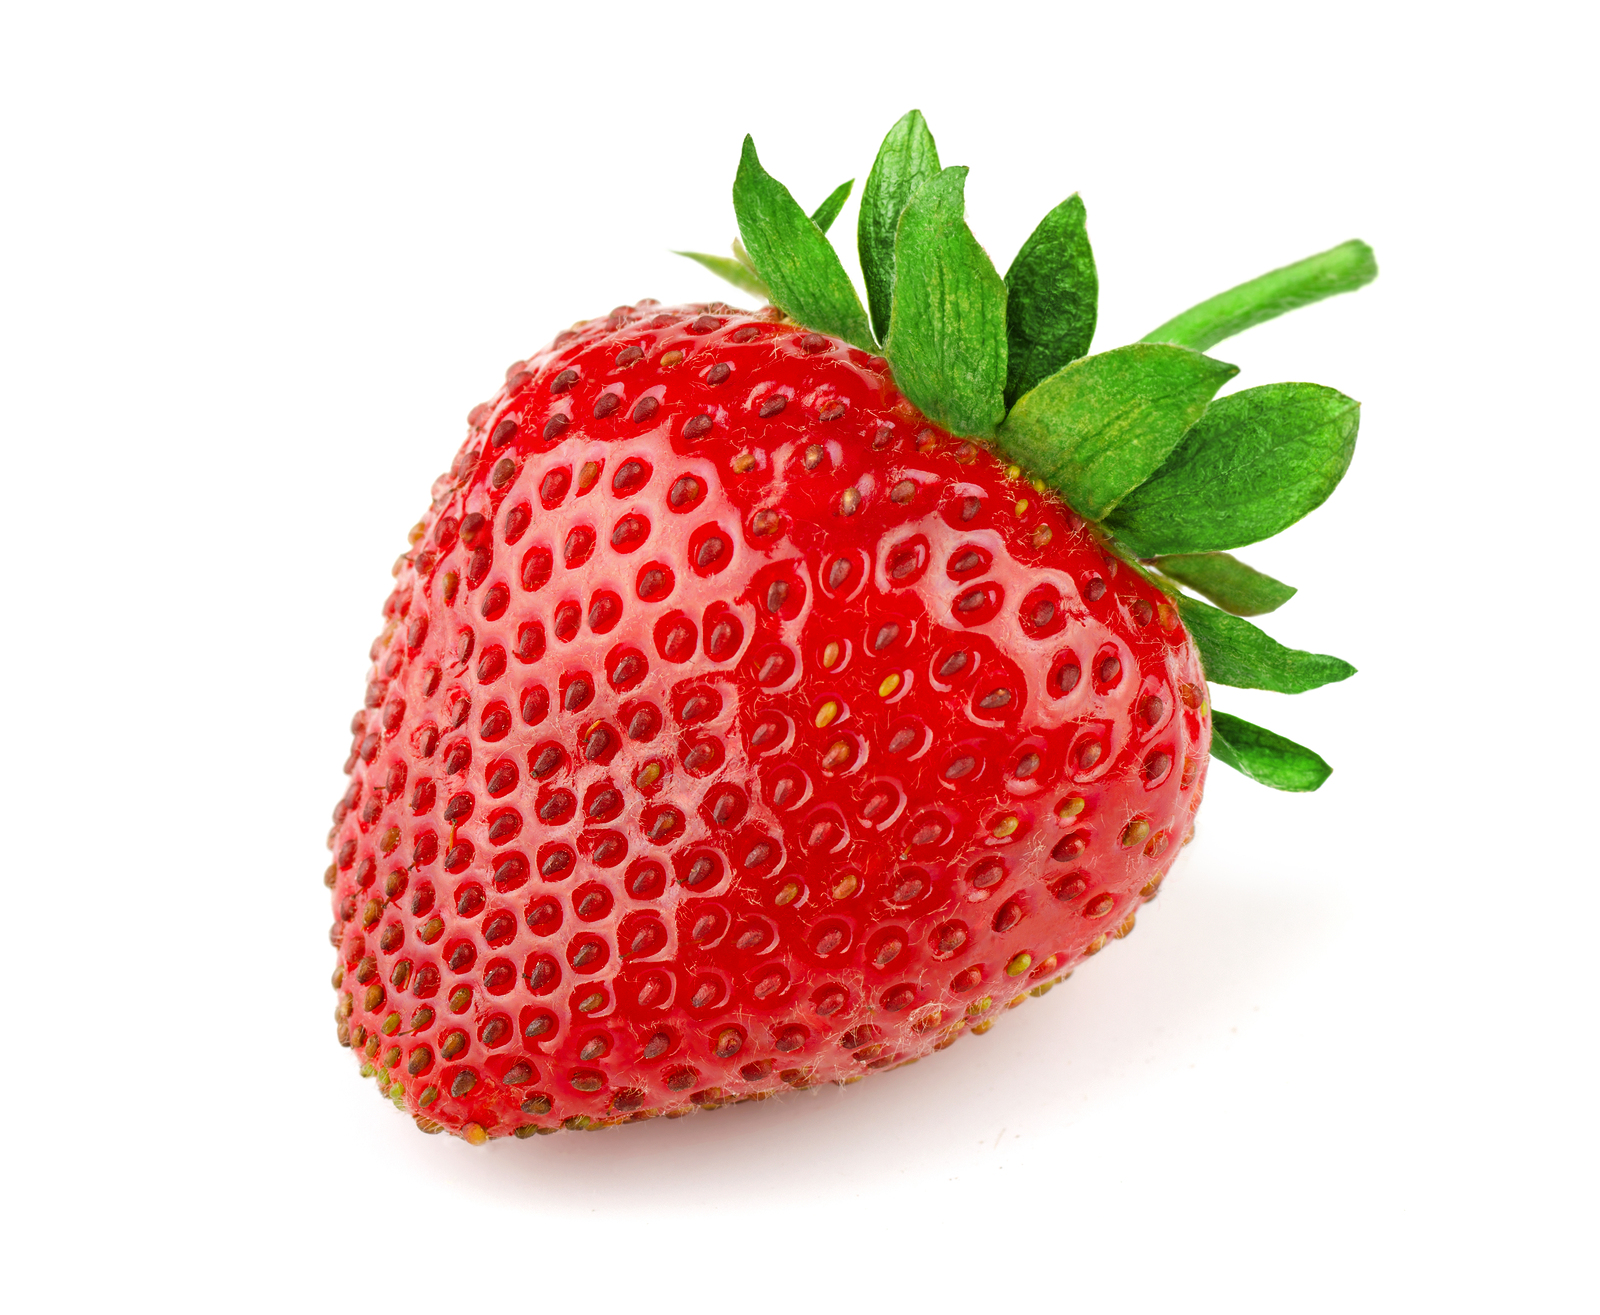 Strawberry Fruit PNG Transparent Background, Free Download #22927 - FreeIconsPNG